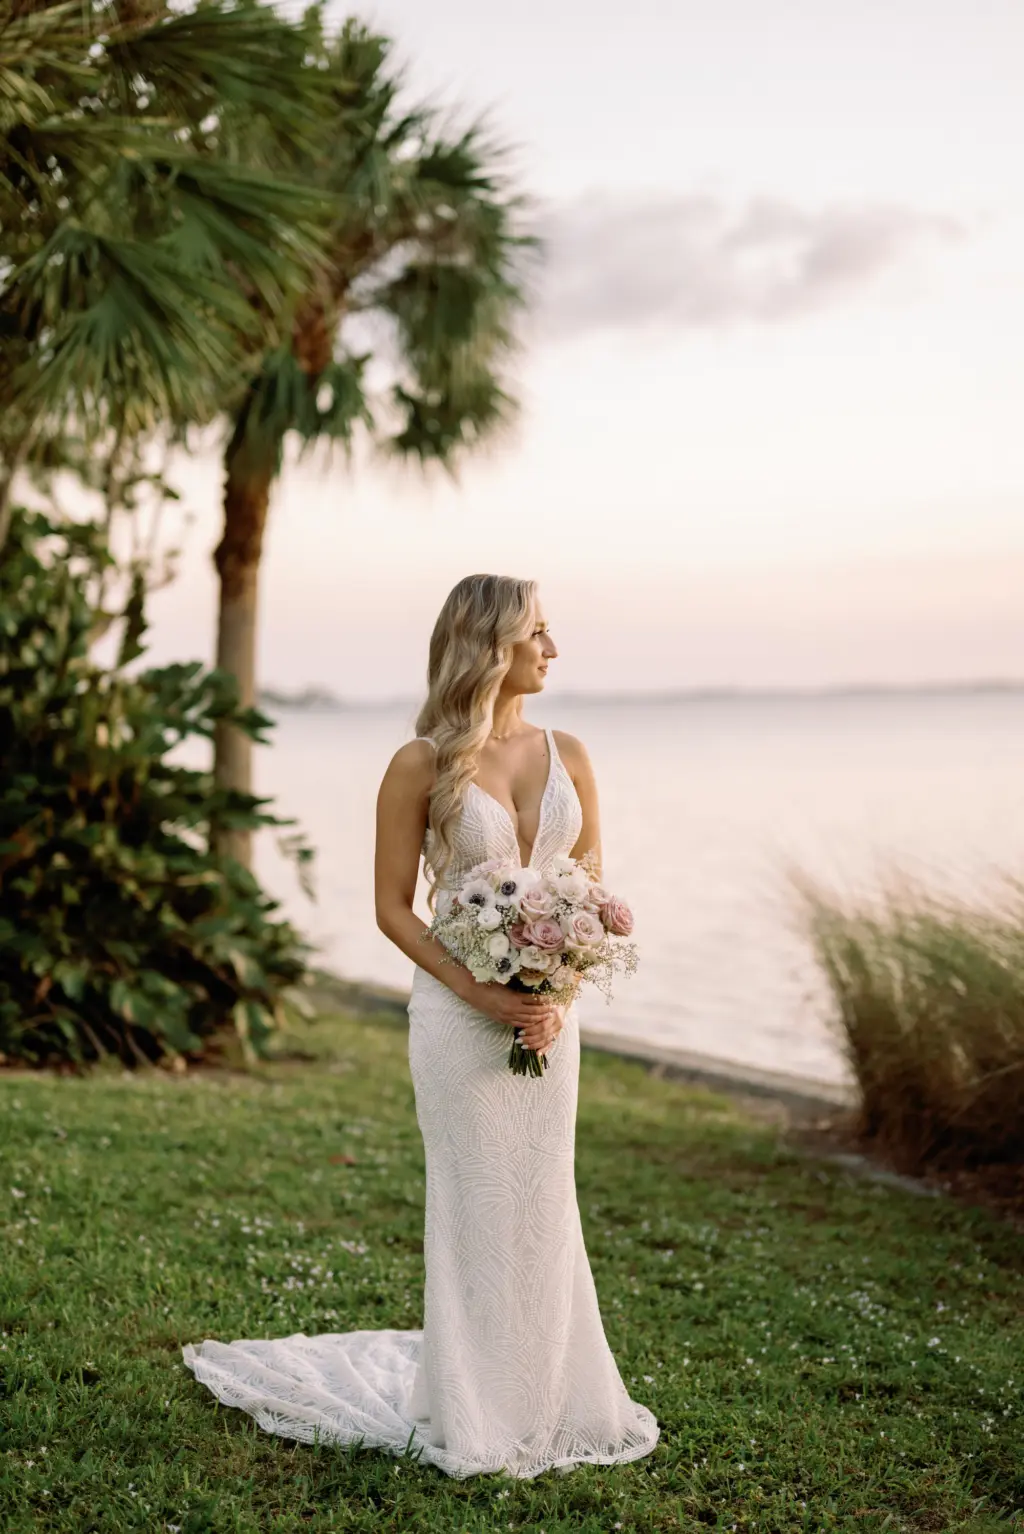 Bride Sunset Wedding Portrait in Made With Love Bridal Dress | Waterfront Sarasota Private Mansion Venue Powel Crosley Estate | Photographer Dewitt For Love Photography